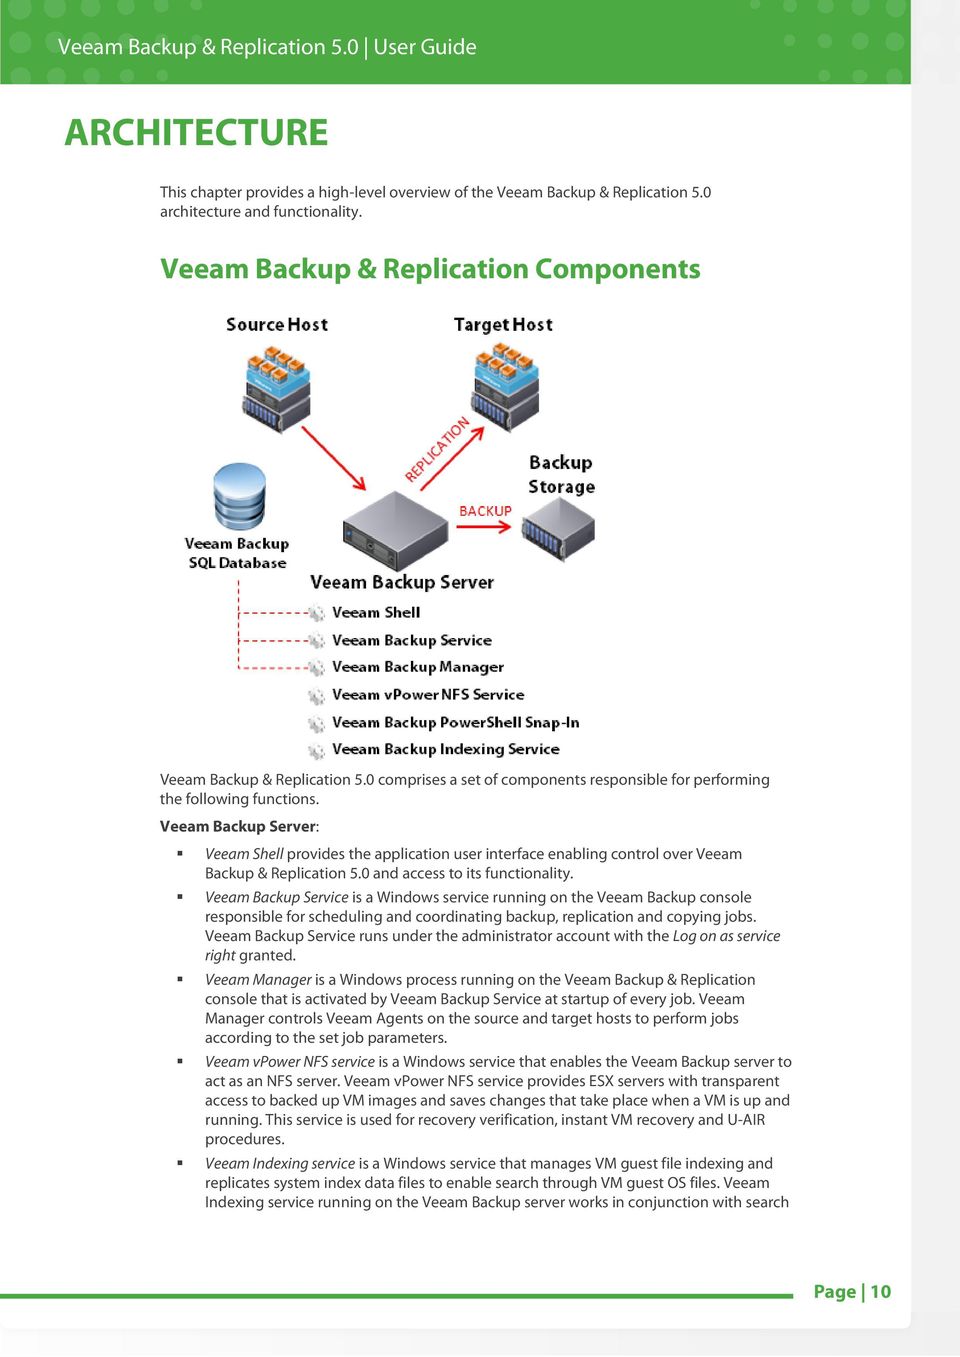 Veeam Backup Server: Veeam Shell provides the application user interface enabling control over Veeam Backup & Replication 5.0 and access to its functionality.